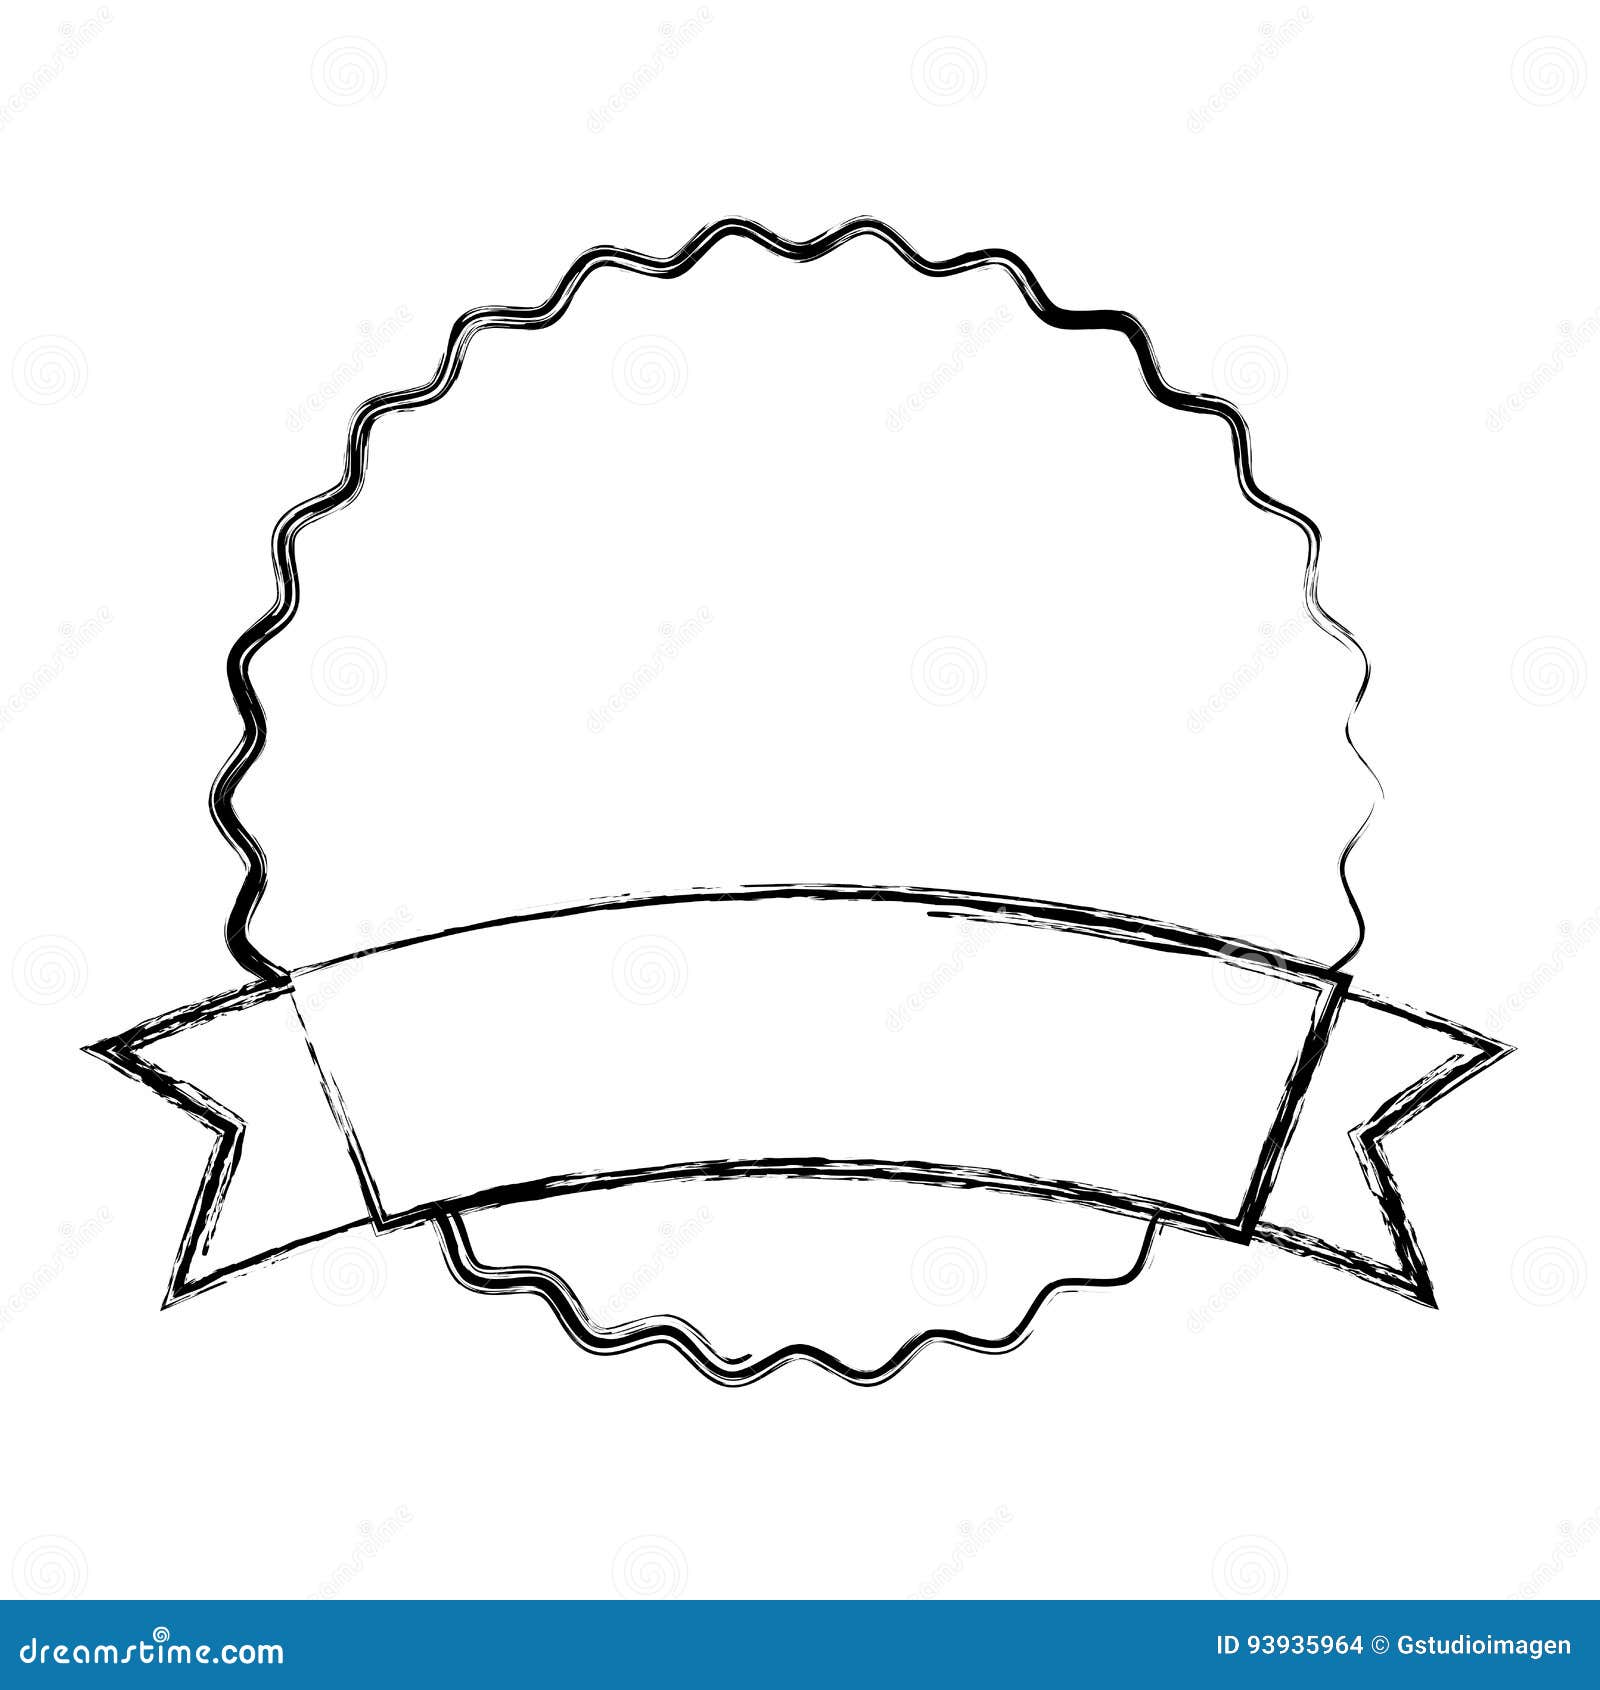 Circle seal emblem icon stock vector. Illustration of sign - 93935964